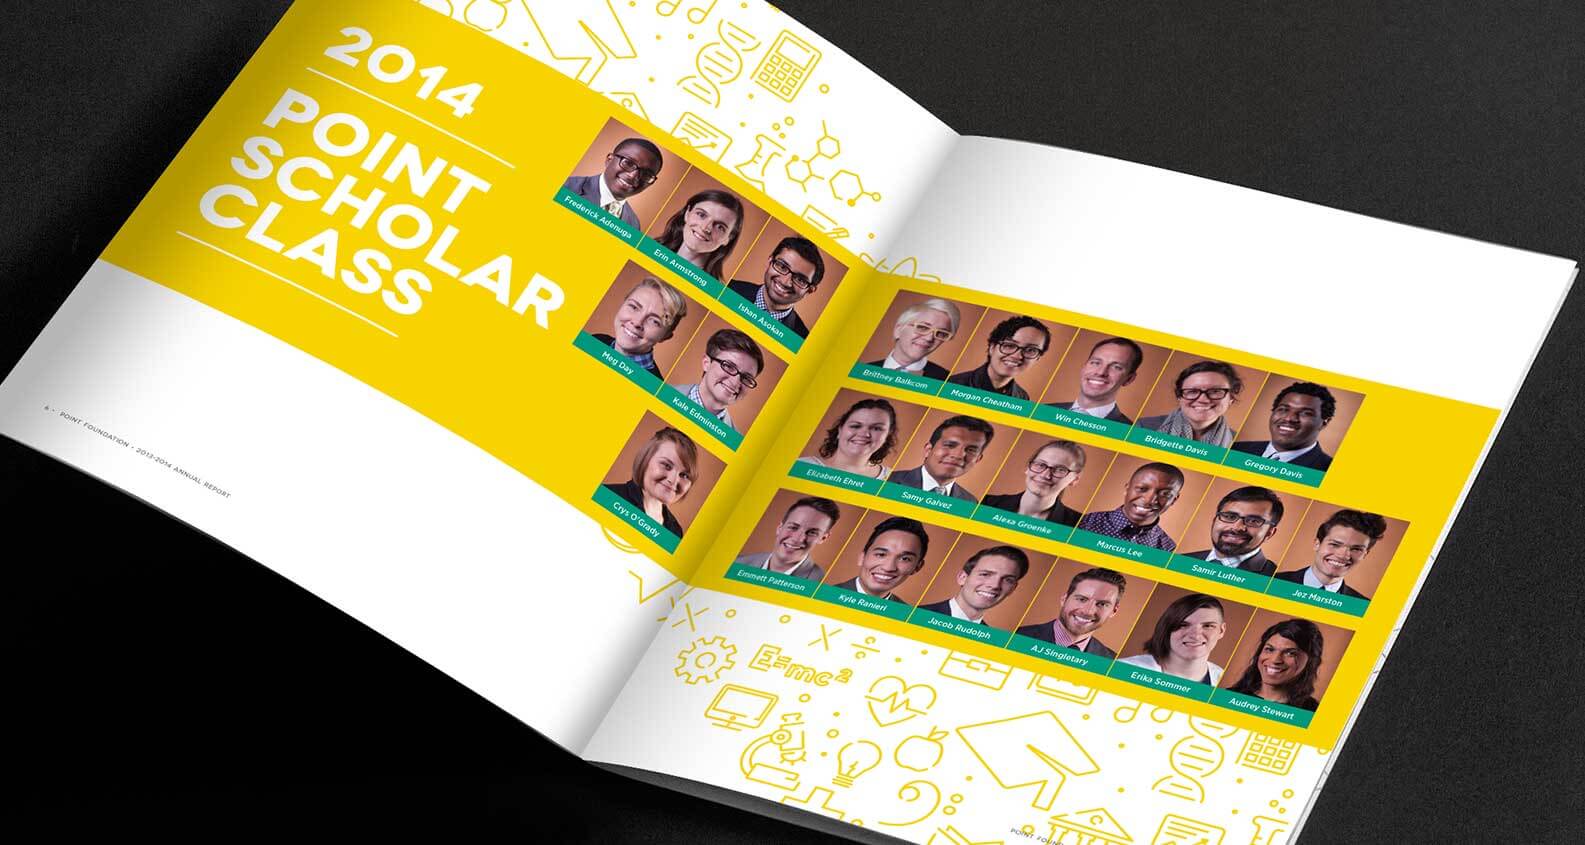 Point Foundation annual report layout design by Jacober Creative